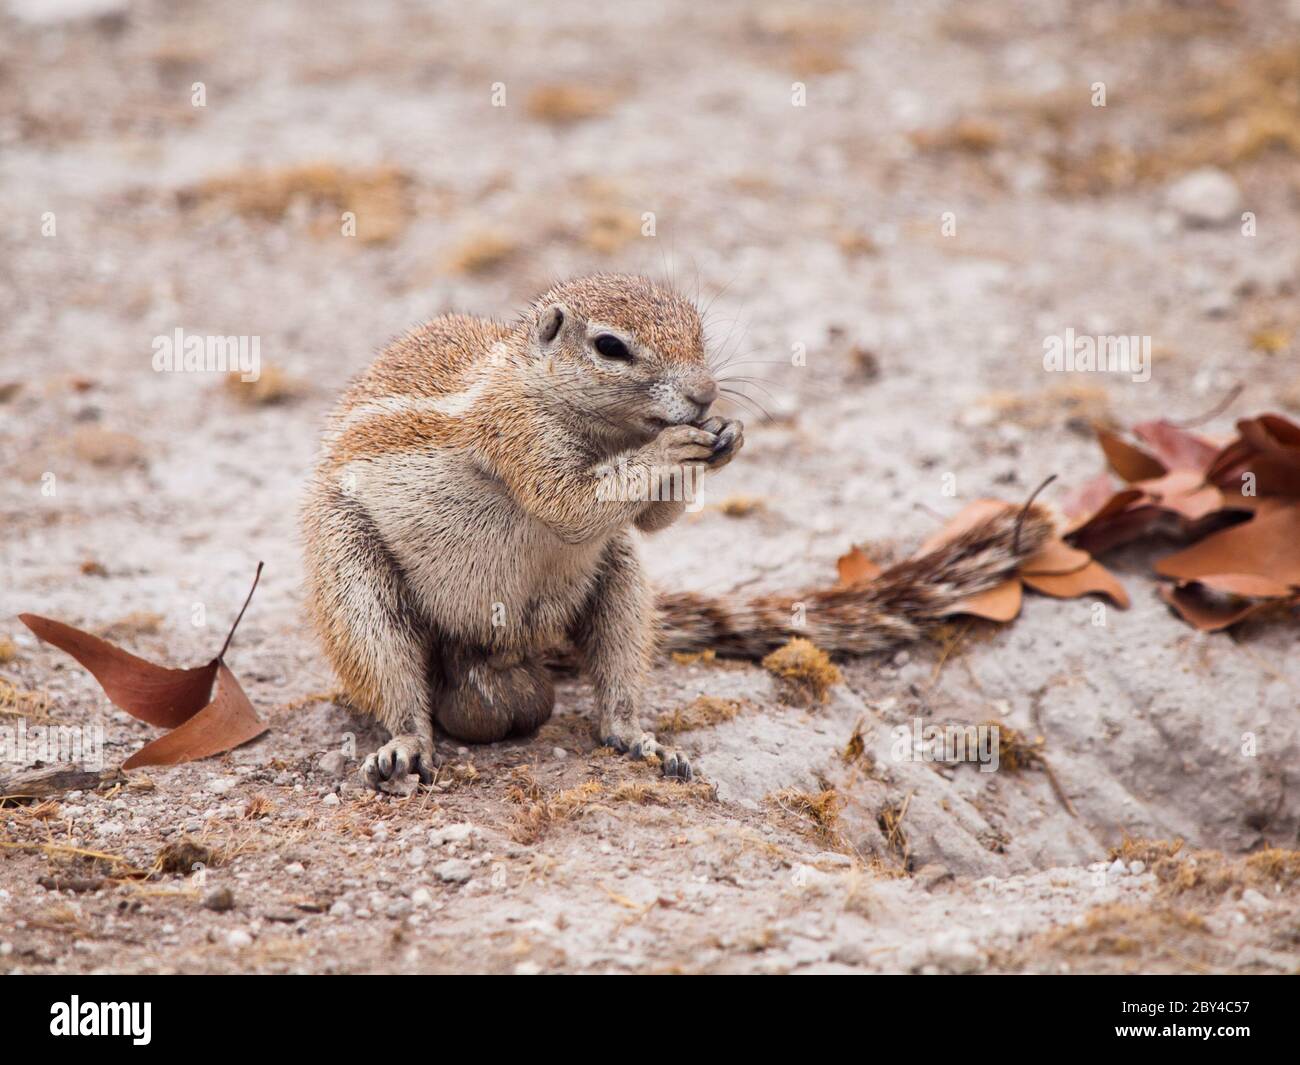 South African ground squirrel, Xerus inauris, sitting and eating, Etosha National Park, Namibia Stock Photo